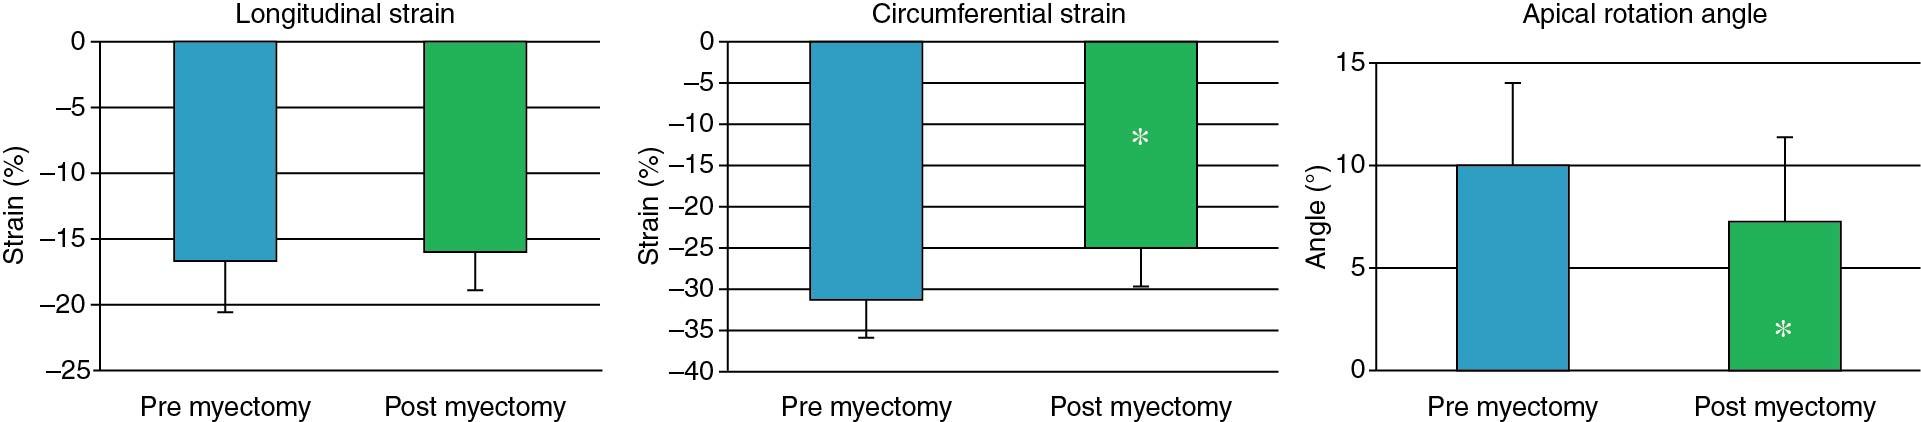 Fig. 4.3, Left ventricular (LV) deformation responses to myomectomy. Longitudinal strain is impaired and does not increase after myectomy. Circumferential deformation and apical counterclockwise rotation are greater than normal before intervention and decrease after myectomy.